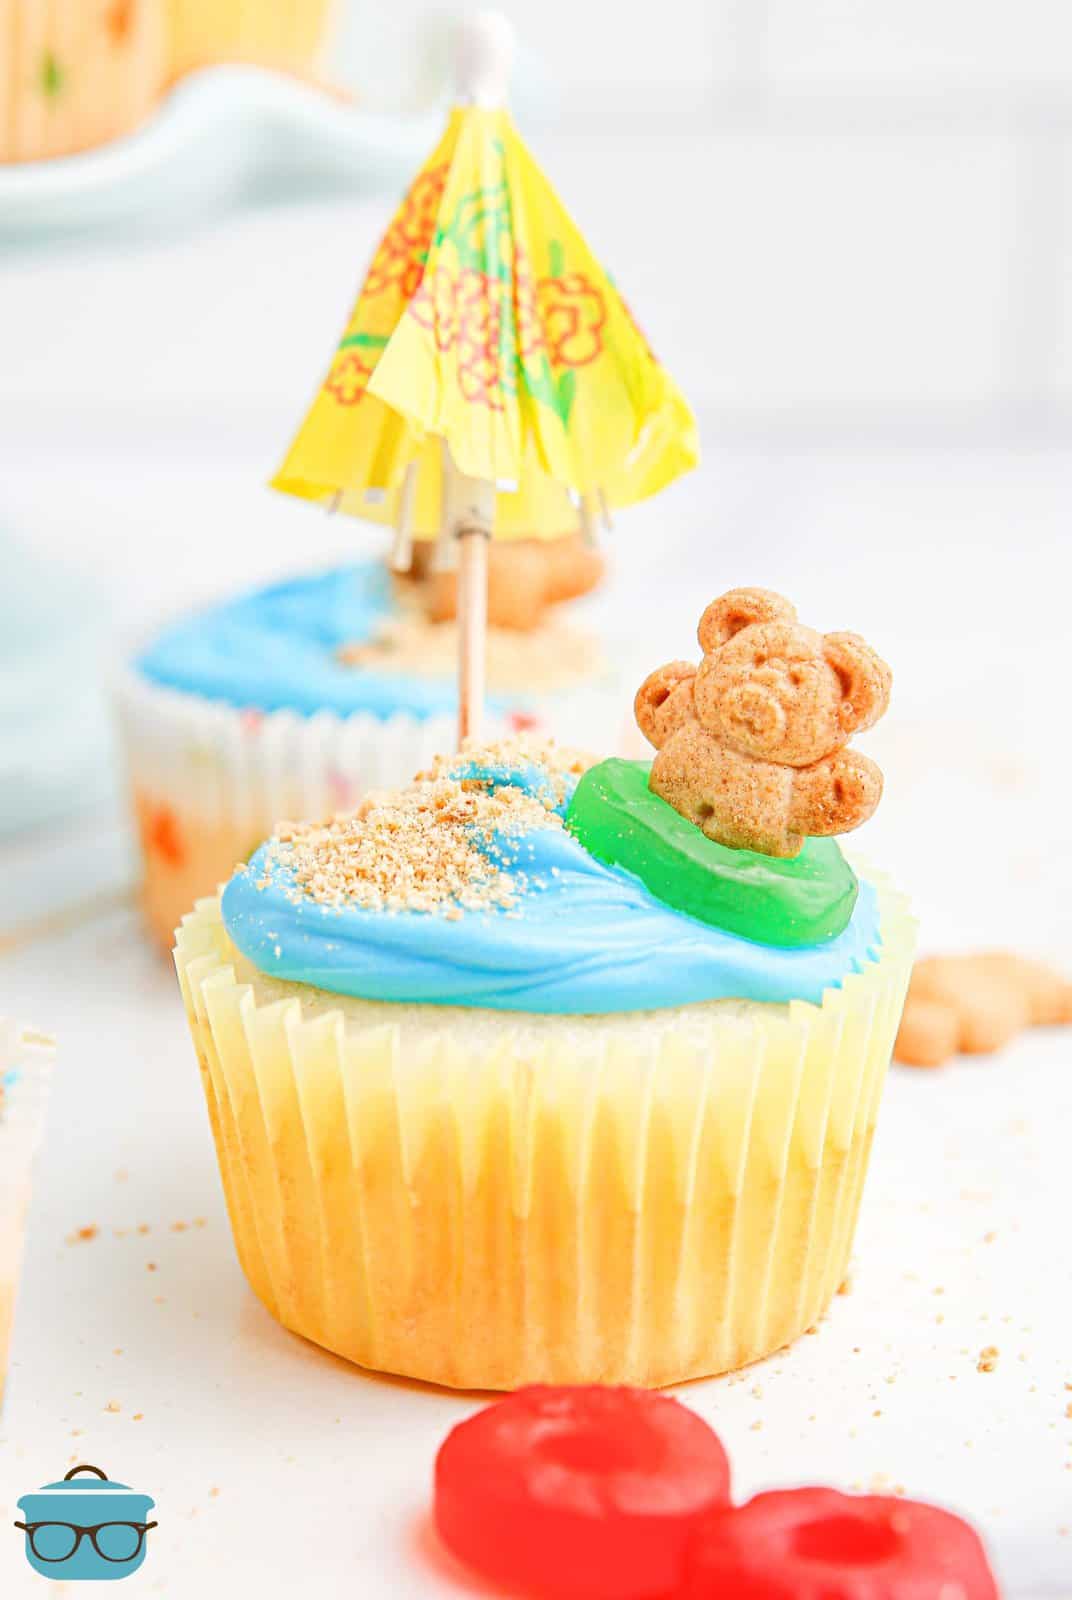 Looking closely at a cupcake decorated with a beach scene, umbrella, and teddy bear.